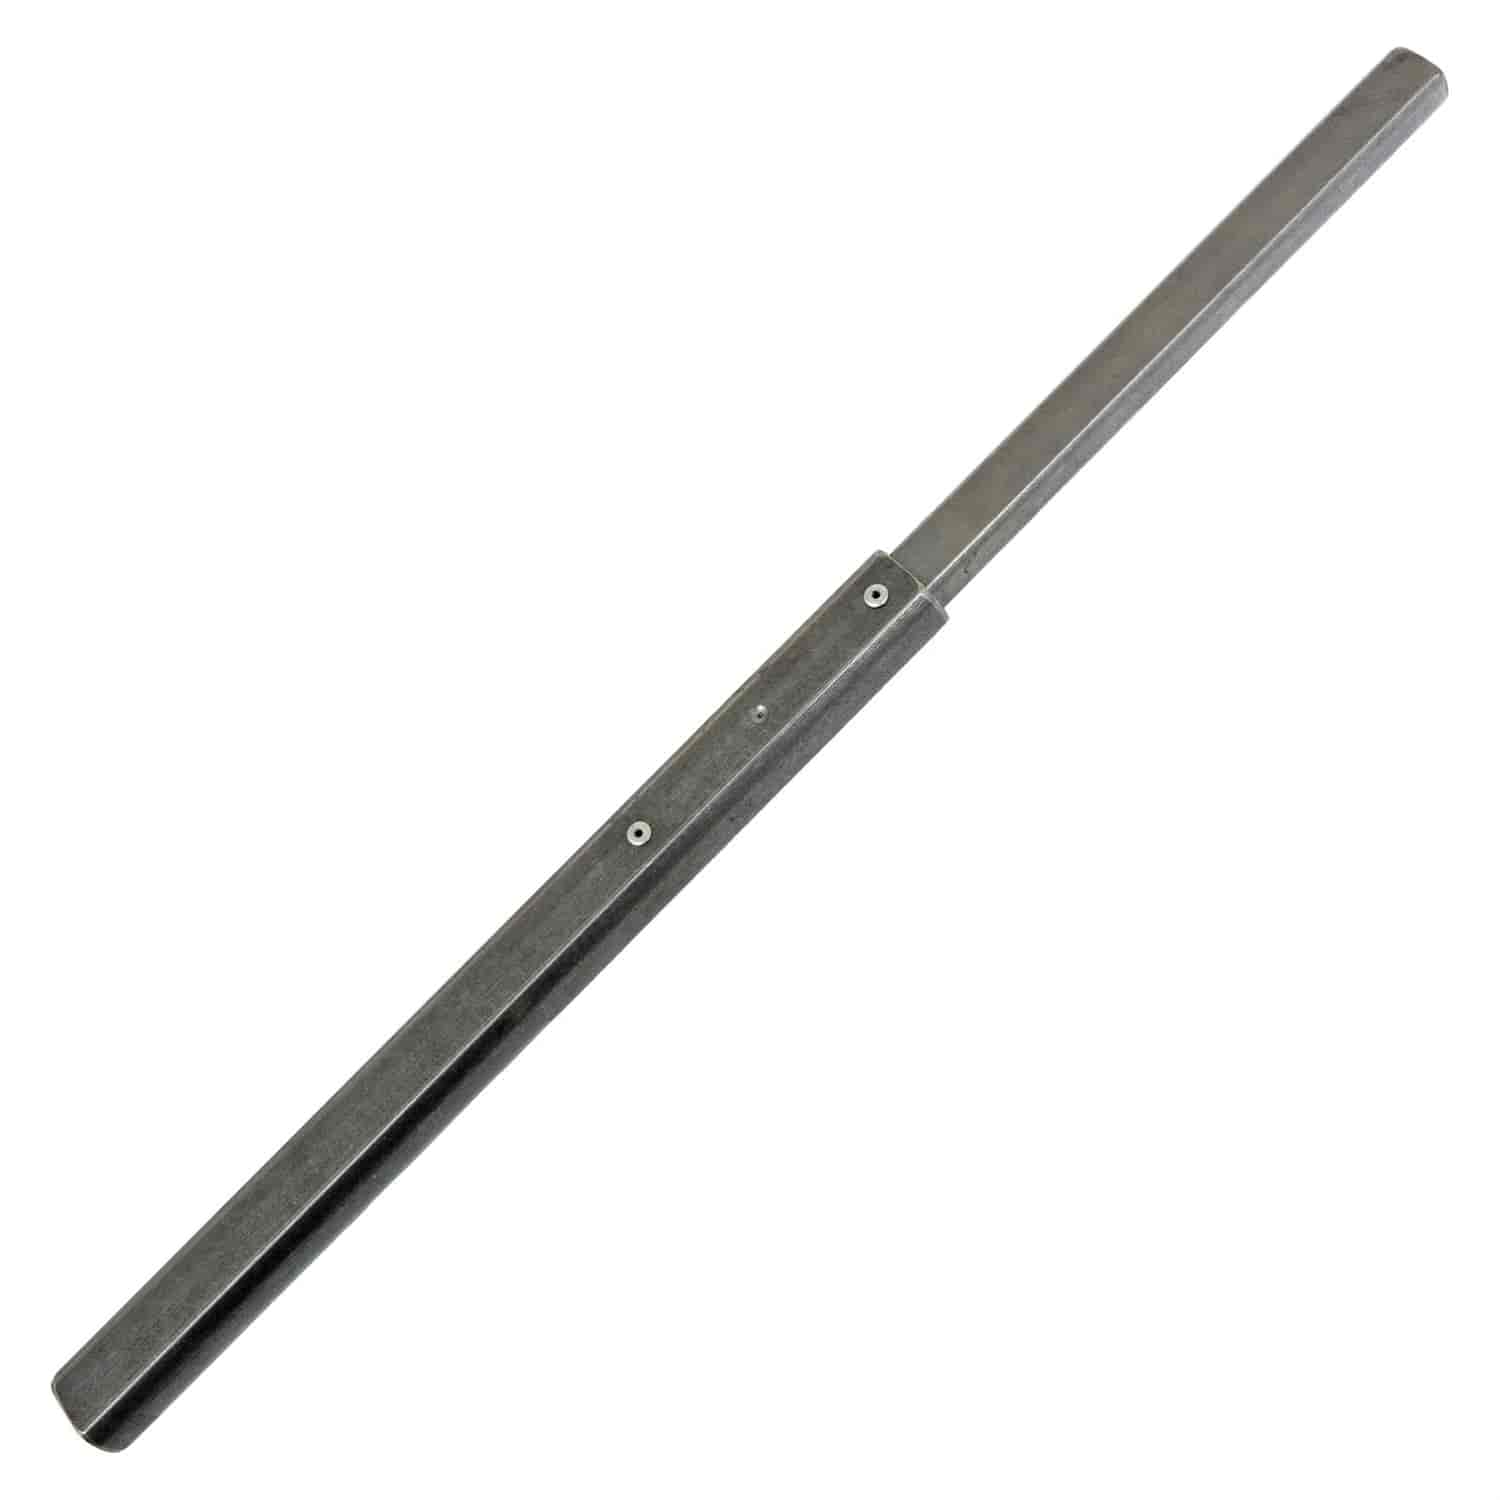 Collapsible Steel Steering Shaft 3/4 in. Double-D x 1 in. Double-D Ends